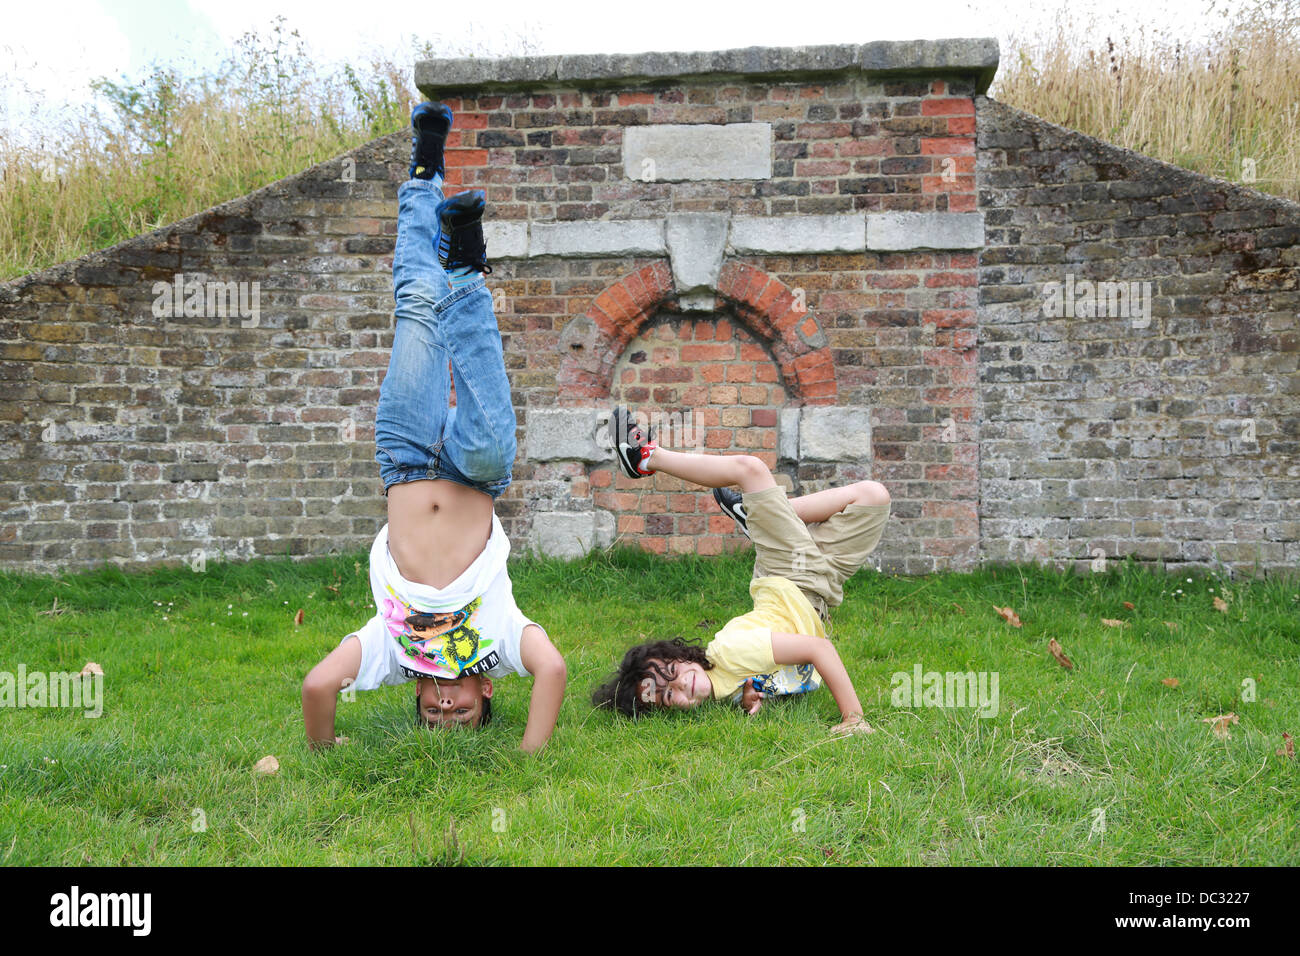 Two young boys break dancing in the park. Stock Photo